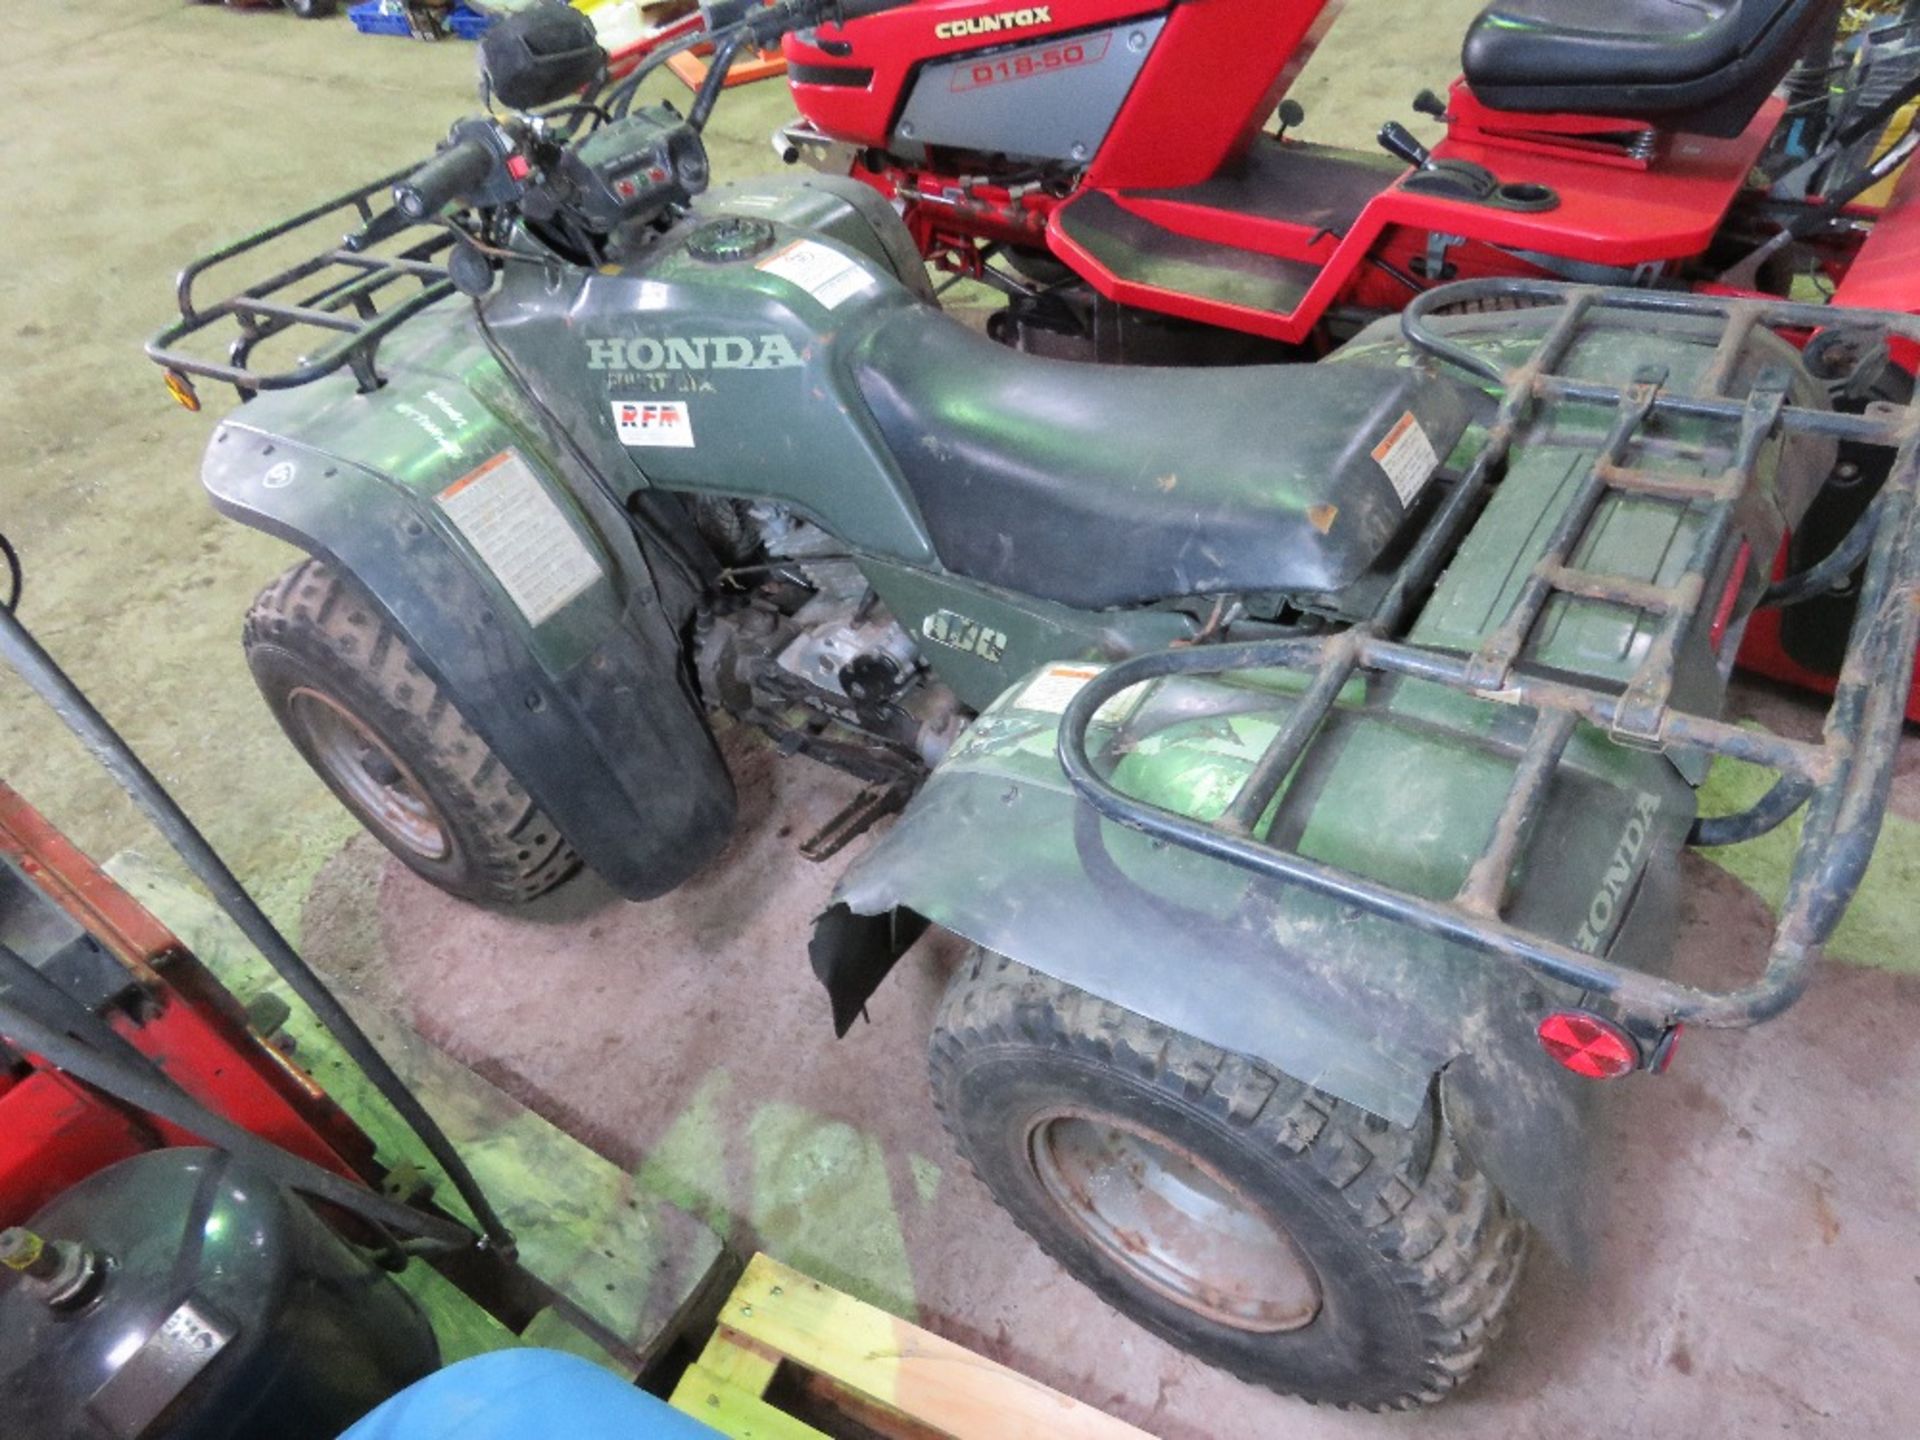 HONDA FOURTRAX 300 PETROL QUAD BIKE, 4WD. WHEN TESTED WAS SEEN TO TURN OVER BUT NOT STARTING...PRES - Image 5 of 10